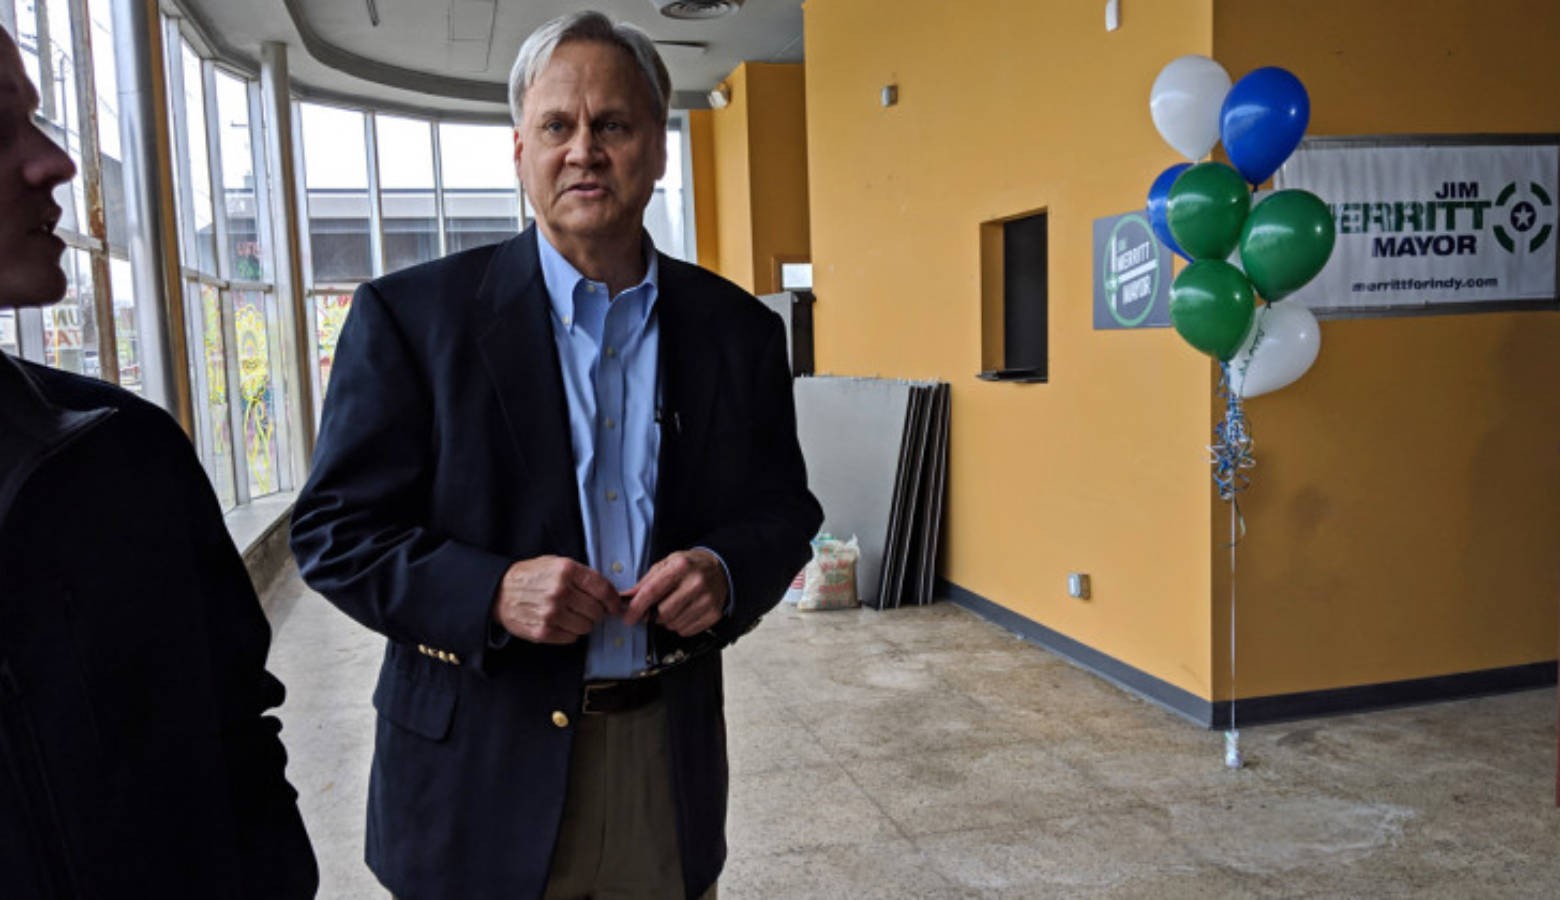 Sen. Jim Merritt says Indianapolis' current administration, led by Democratic Mayor Joe Hogsett, has failed to come up with long-term solutions to many of the city’s problems. "They patch," he says of his opponents.